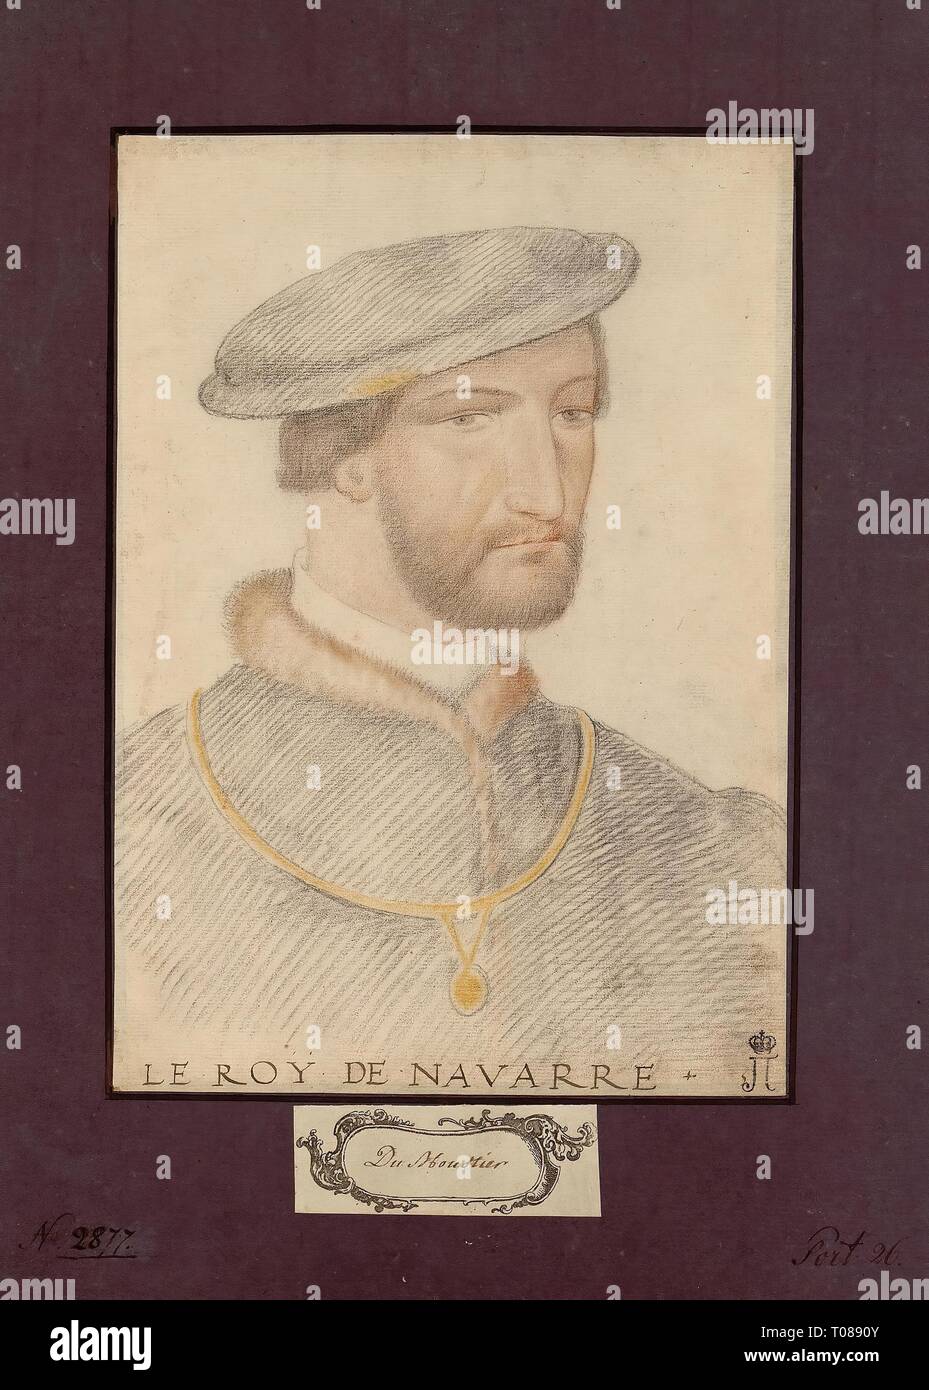 'Portrait of the King of Navarre'. France, circa 1546. Dimensions: 29x20,3 cm. Museum: State Hermitage, St. Petersburg. Author: Anonymous Artist, mid-16th century. Stock Photo